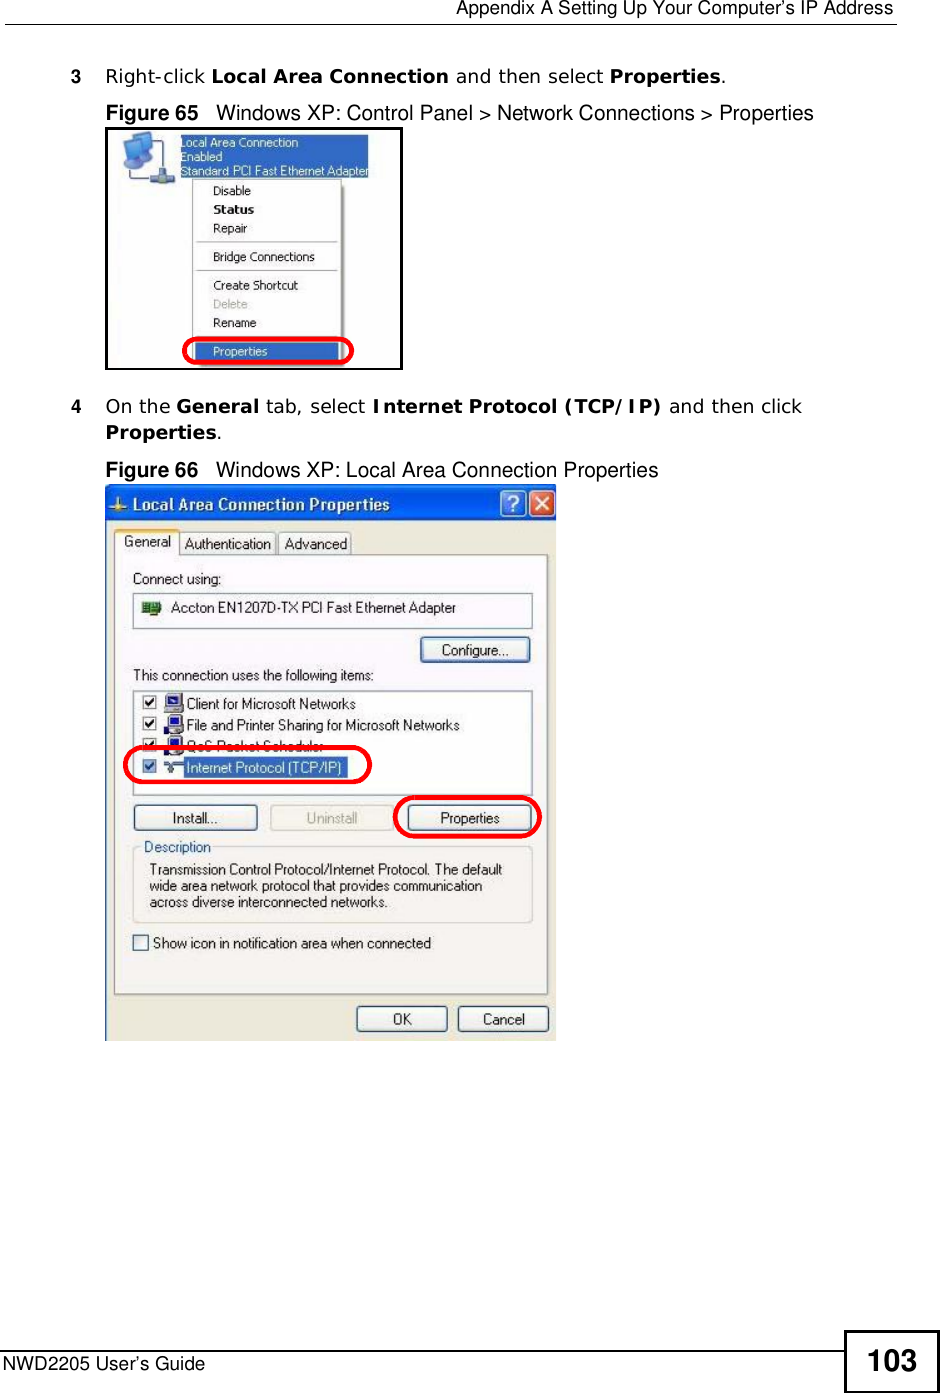  Appendix ASetting Up Your Computer’s IP AddressNWD2205 User’s Guide 1033Right-click Local Area Connection and then select Properties.Figure 65   Windows XP: Control Panel &gt; Network Connections &gt; Properties4On the General tab, select Internet Protocol (TCP/IP) and then click Properties.Figure 66   Windows XP: Local Area Connection Properties